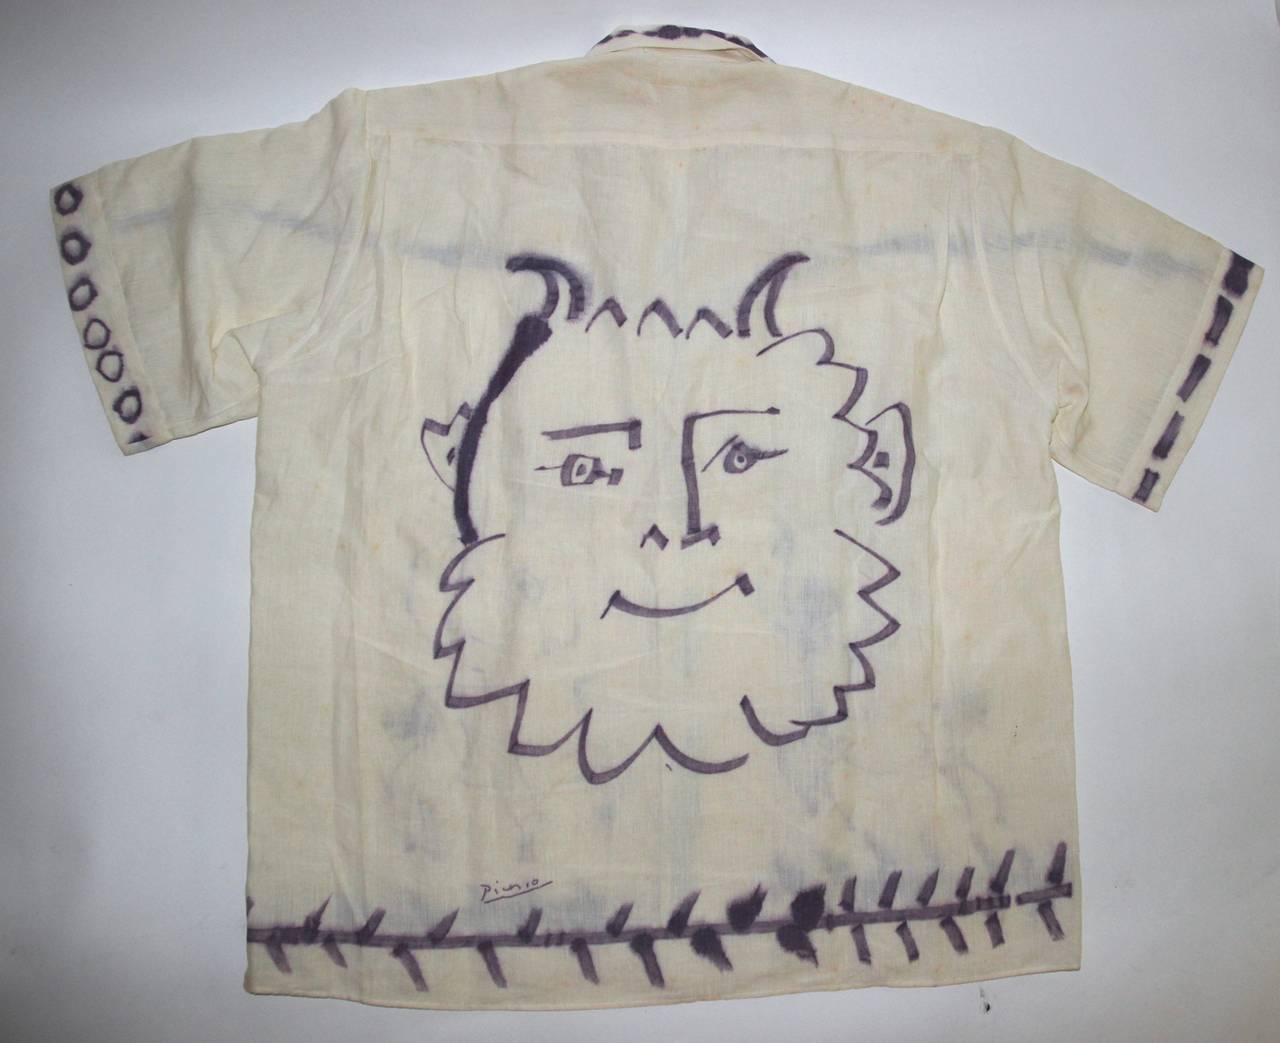 Pablo PICASSO (1881-1973),
Multiple shirt,
Designed by Picasso in 1955,
Reproduced on line in 1990,
In a cardboard box, with certificate and proof edition numbered 0398,
Signed and stamped by Bruno Compagnon and Spadem,
Buffered and numbered